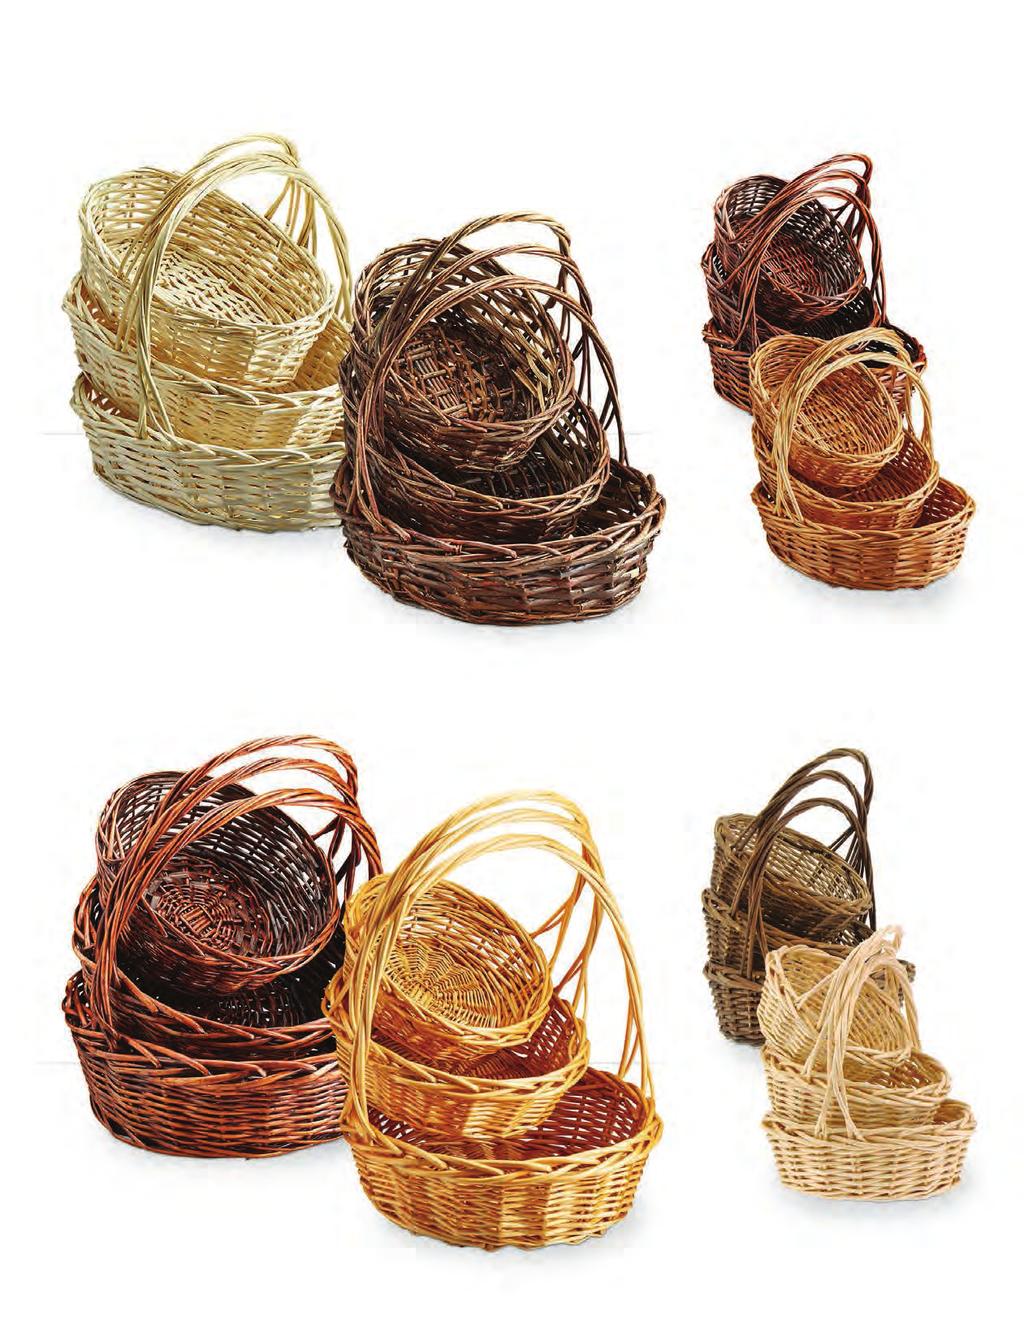 Set/3 Oval Willow Baskets Large: 12 x 10 x 4.75 Small: 9.5 x 7.875 x 3.875 Includes Hard Plastic Liners 80003-ST 4/$11.99 set 80003-NAT 4/$11.99 set 80003-UP 4/$11.99 set 80003-BUFF 4/$11.